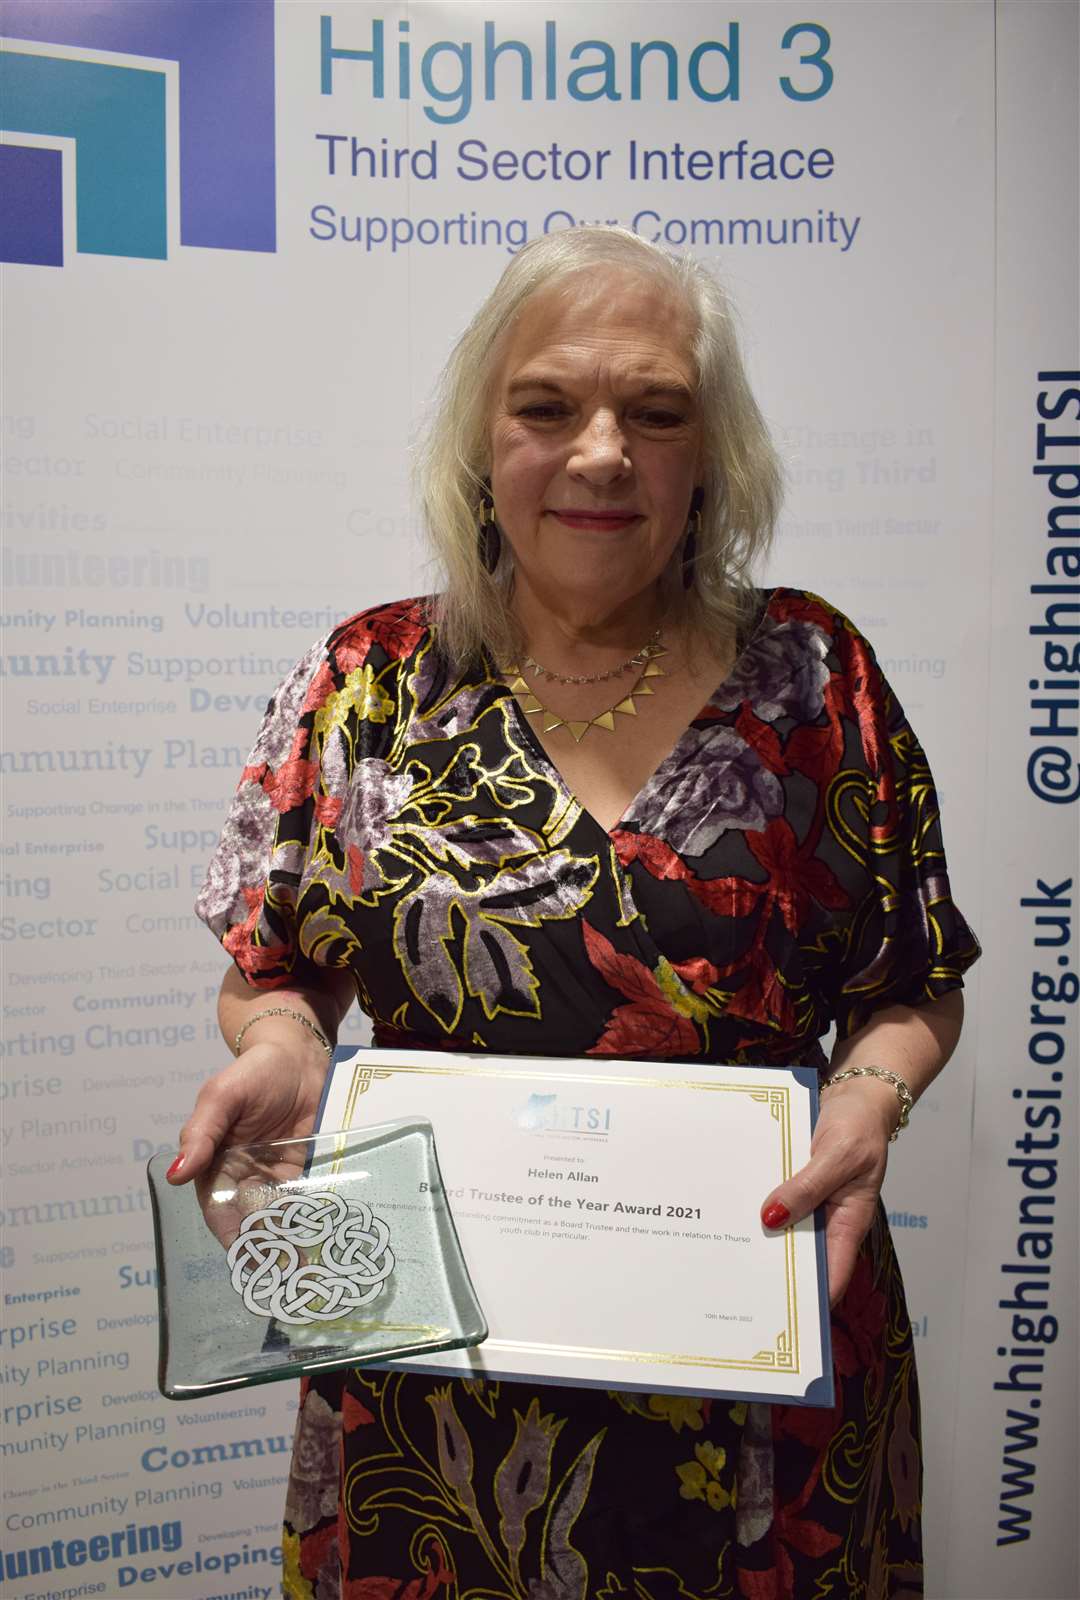 Helen Allan after being named as Board Trustee of the Year in the Highland Third Sector Awards in 2022.